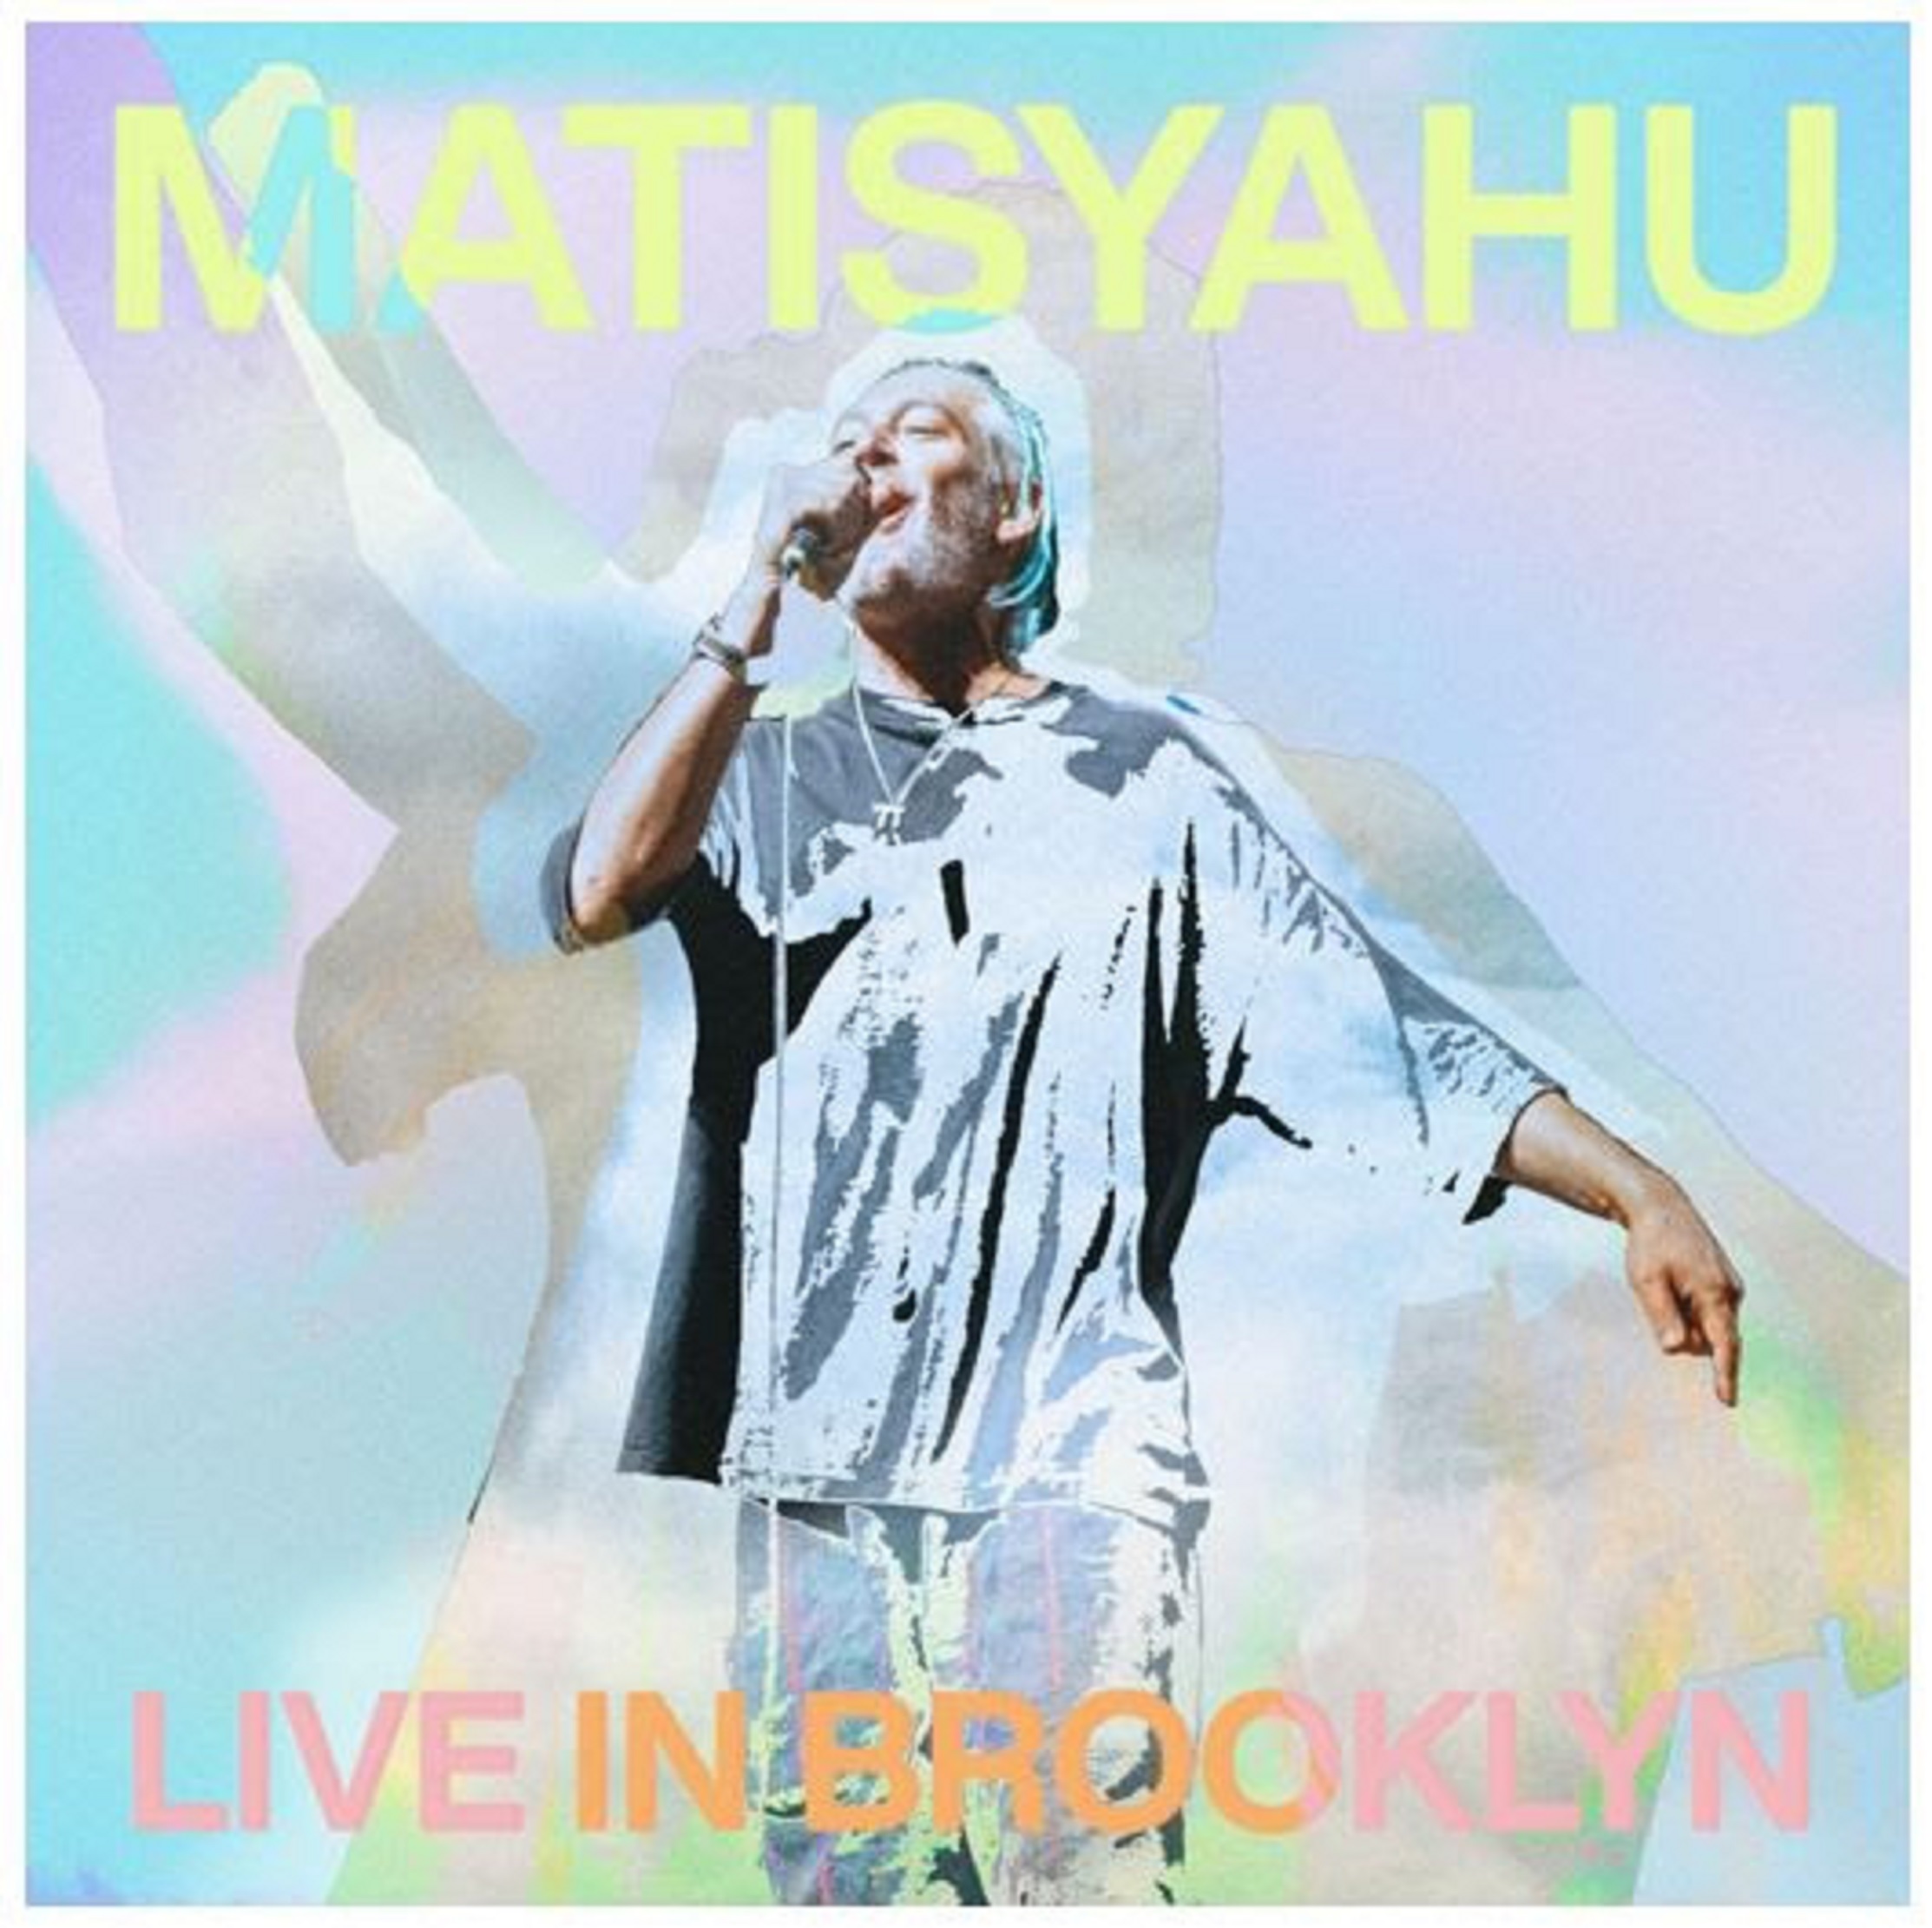 Matisyahu Announces 'Live In Brooklyn' Album Out June 30 | Stream "One Day (Live)" Now